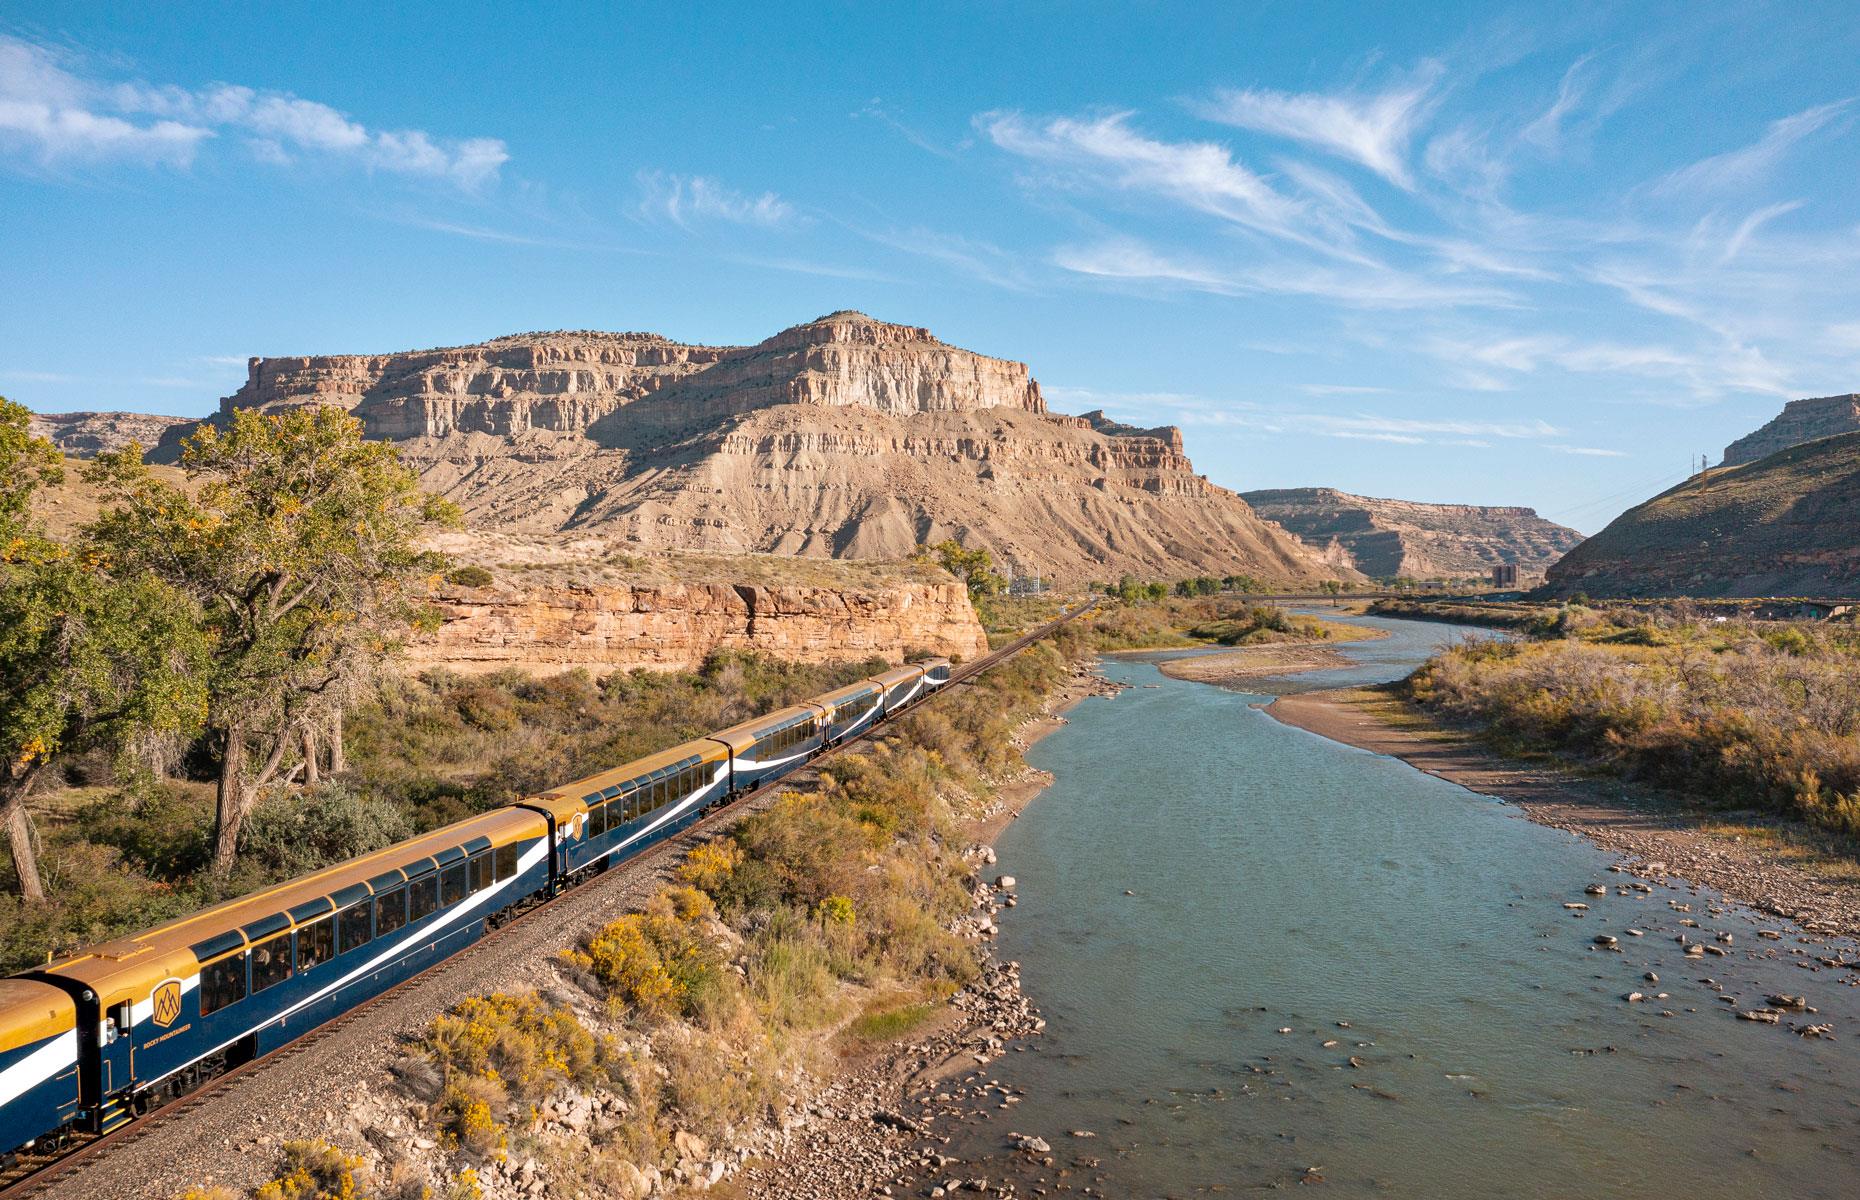 <p>Rocky Mountaineer’s <a href="https://www.rockymountaineer.com/train-routes/rockies-red-rocks">Rockies to the Red Rocks rail route</a> runs between Denver, Colorado and Moab, Utah. The scenic train journey in the USA’s southwest has a length of 354 miles and takes a day and a half to complete, including an overnight stay in pretty resort town Glenwood Springs. As the route name suggests, the geology of the region is one of its star attractions, with the Rocky Mountains, rugged canyons, russet-colored rocks and swathes of desert visible from the train’s panoramic windows.</p>  <p><strong>Click through the gallery to discover some of the standout experiences from Rocky Mountaineer's epic Rockies to the Red Rocks train trip...</strong></p>